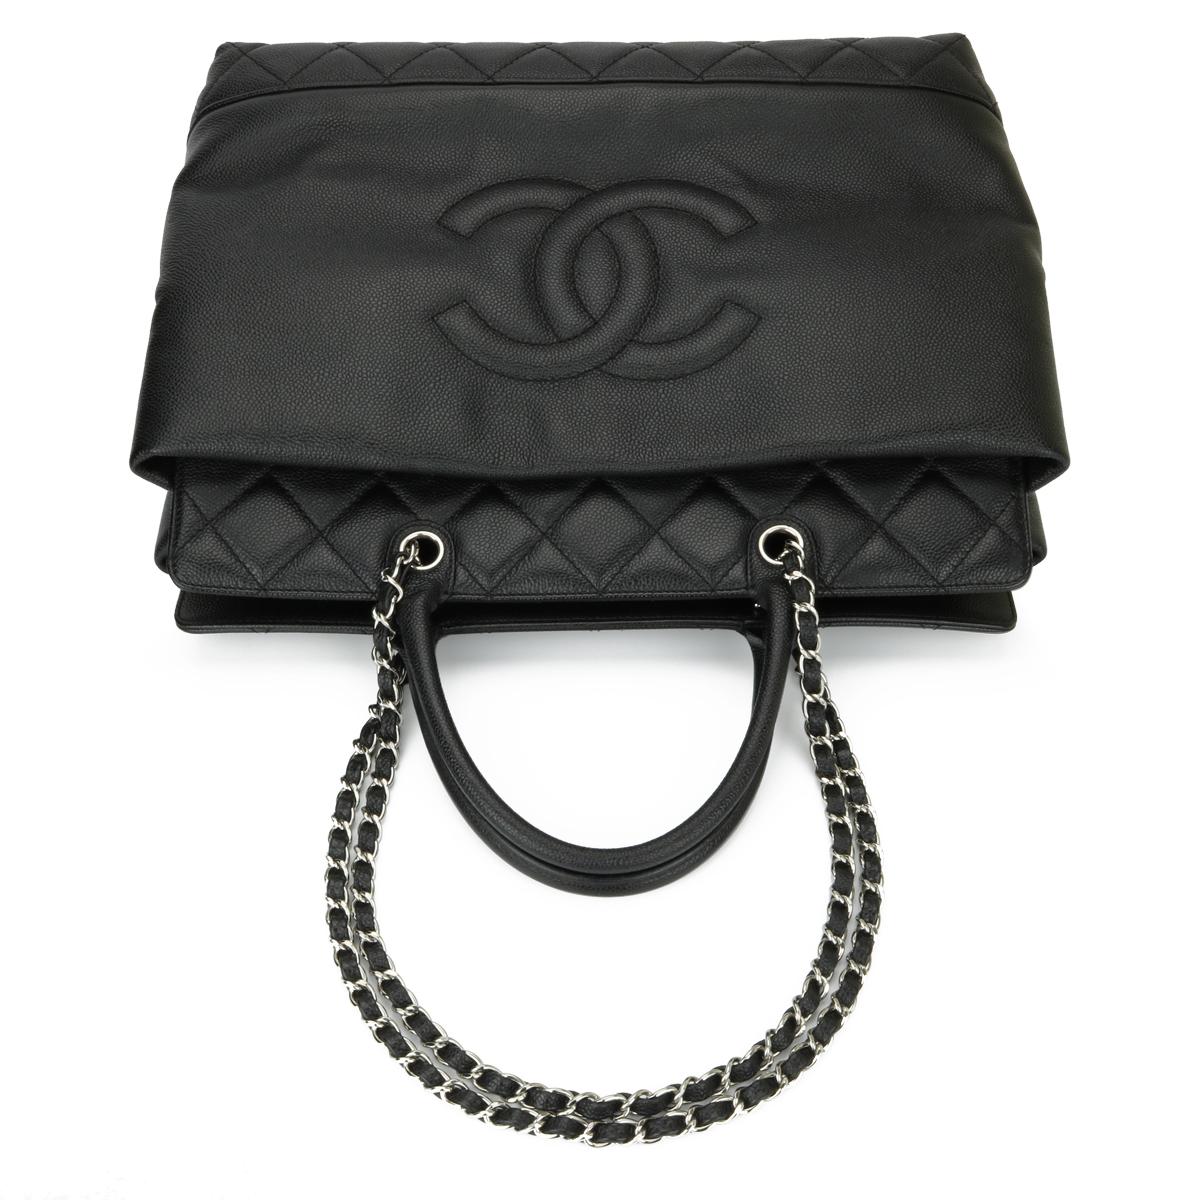 CHANEL Large Shopping Tote Bag Black Caviar with Silver Hardware 2011 6